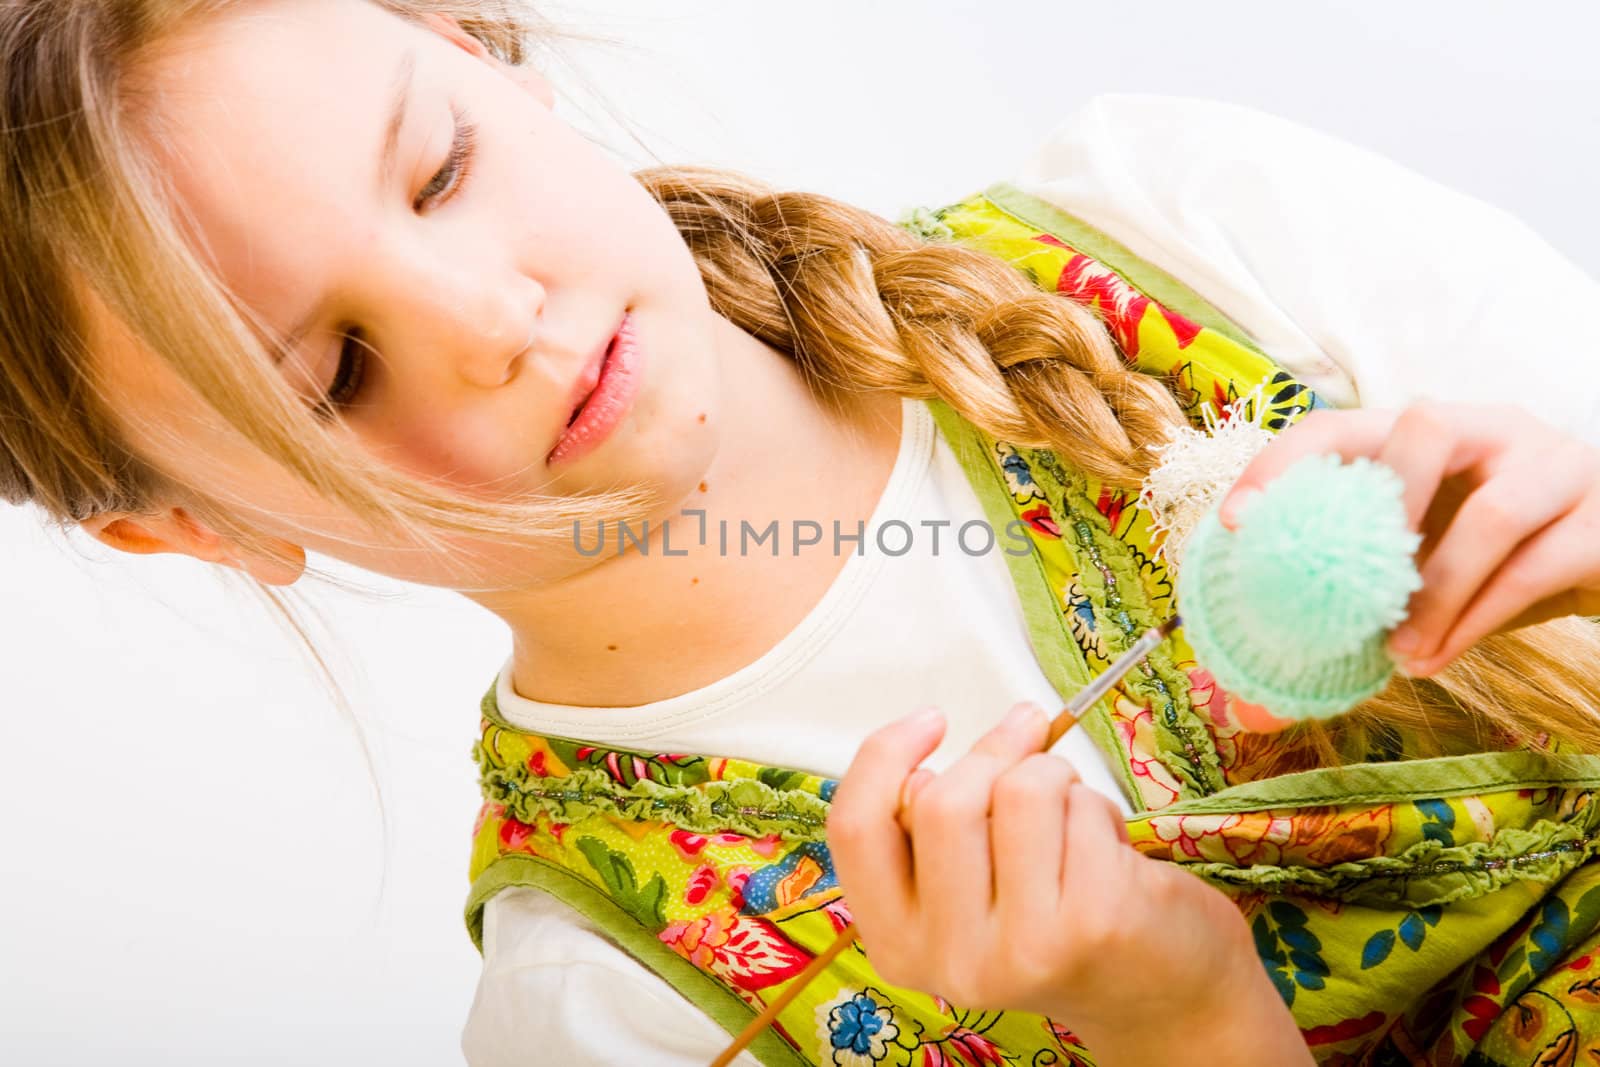 Studio portrait of a young blond girl who is concentrated on painting an egg